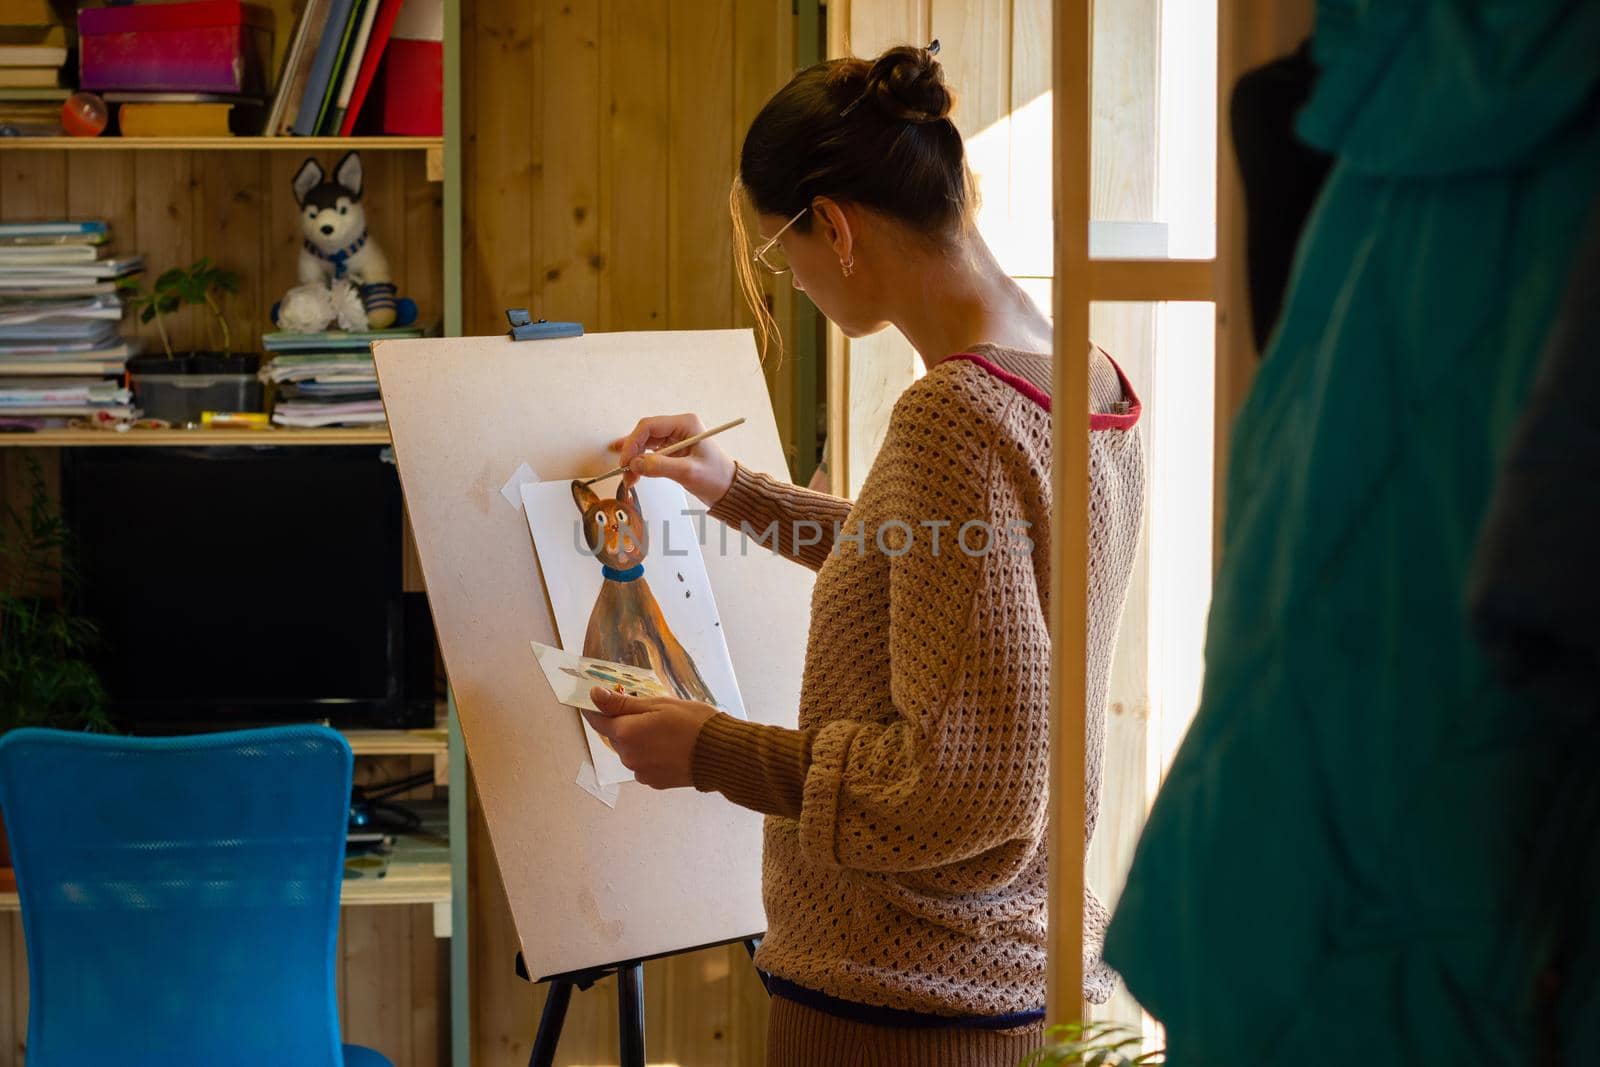 The artist paints a drawing of a cat with acrylic paints on an easel, in a small workshop by the window